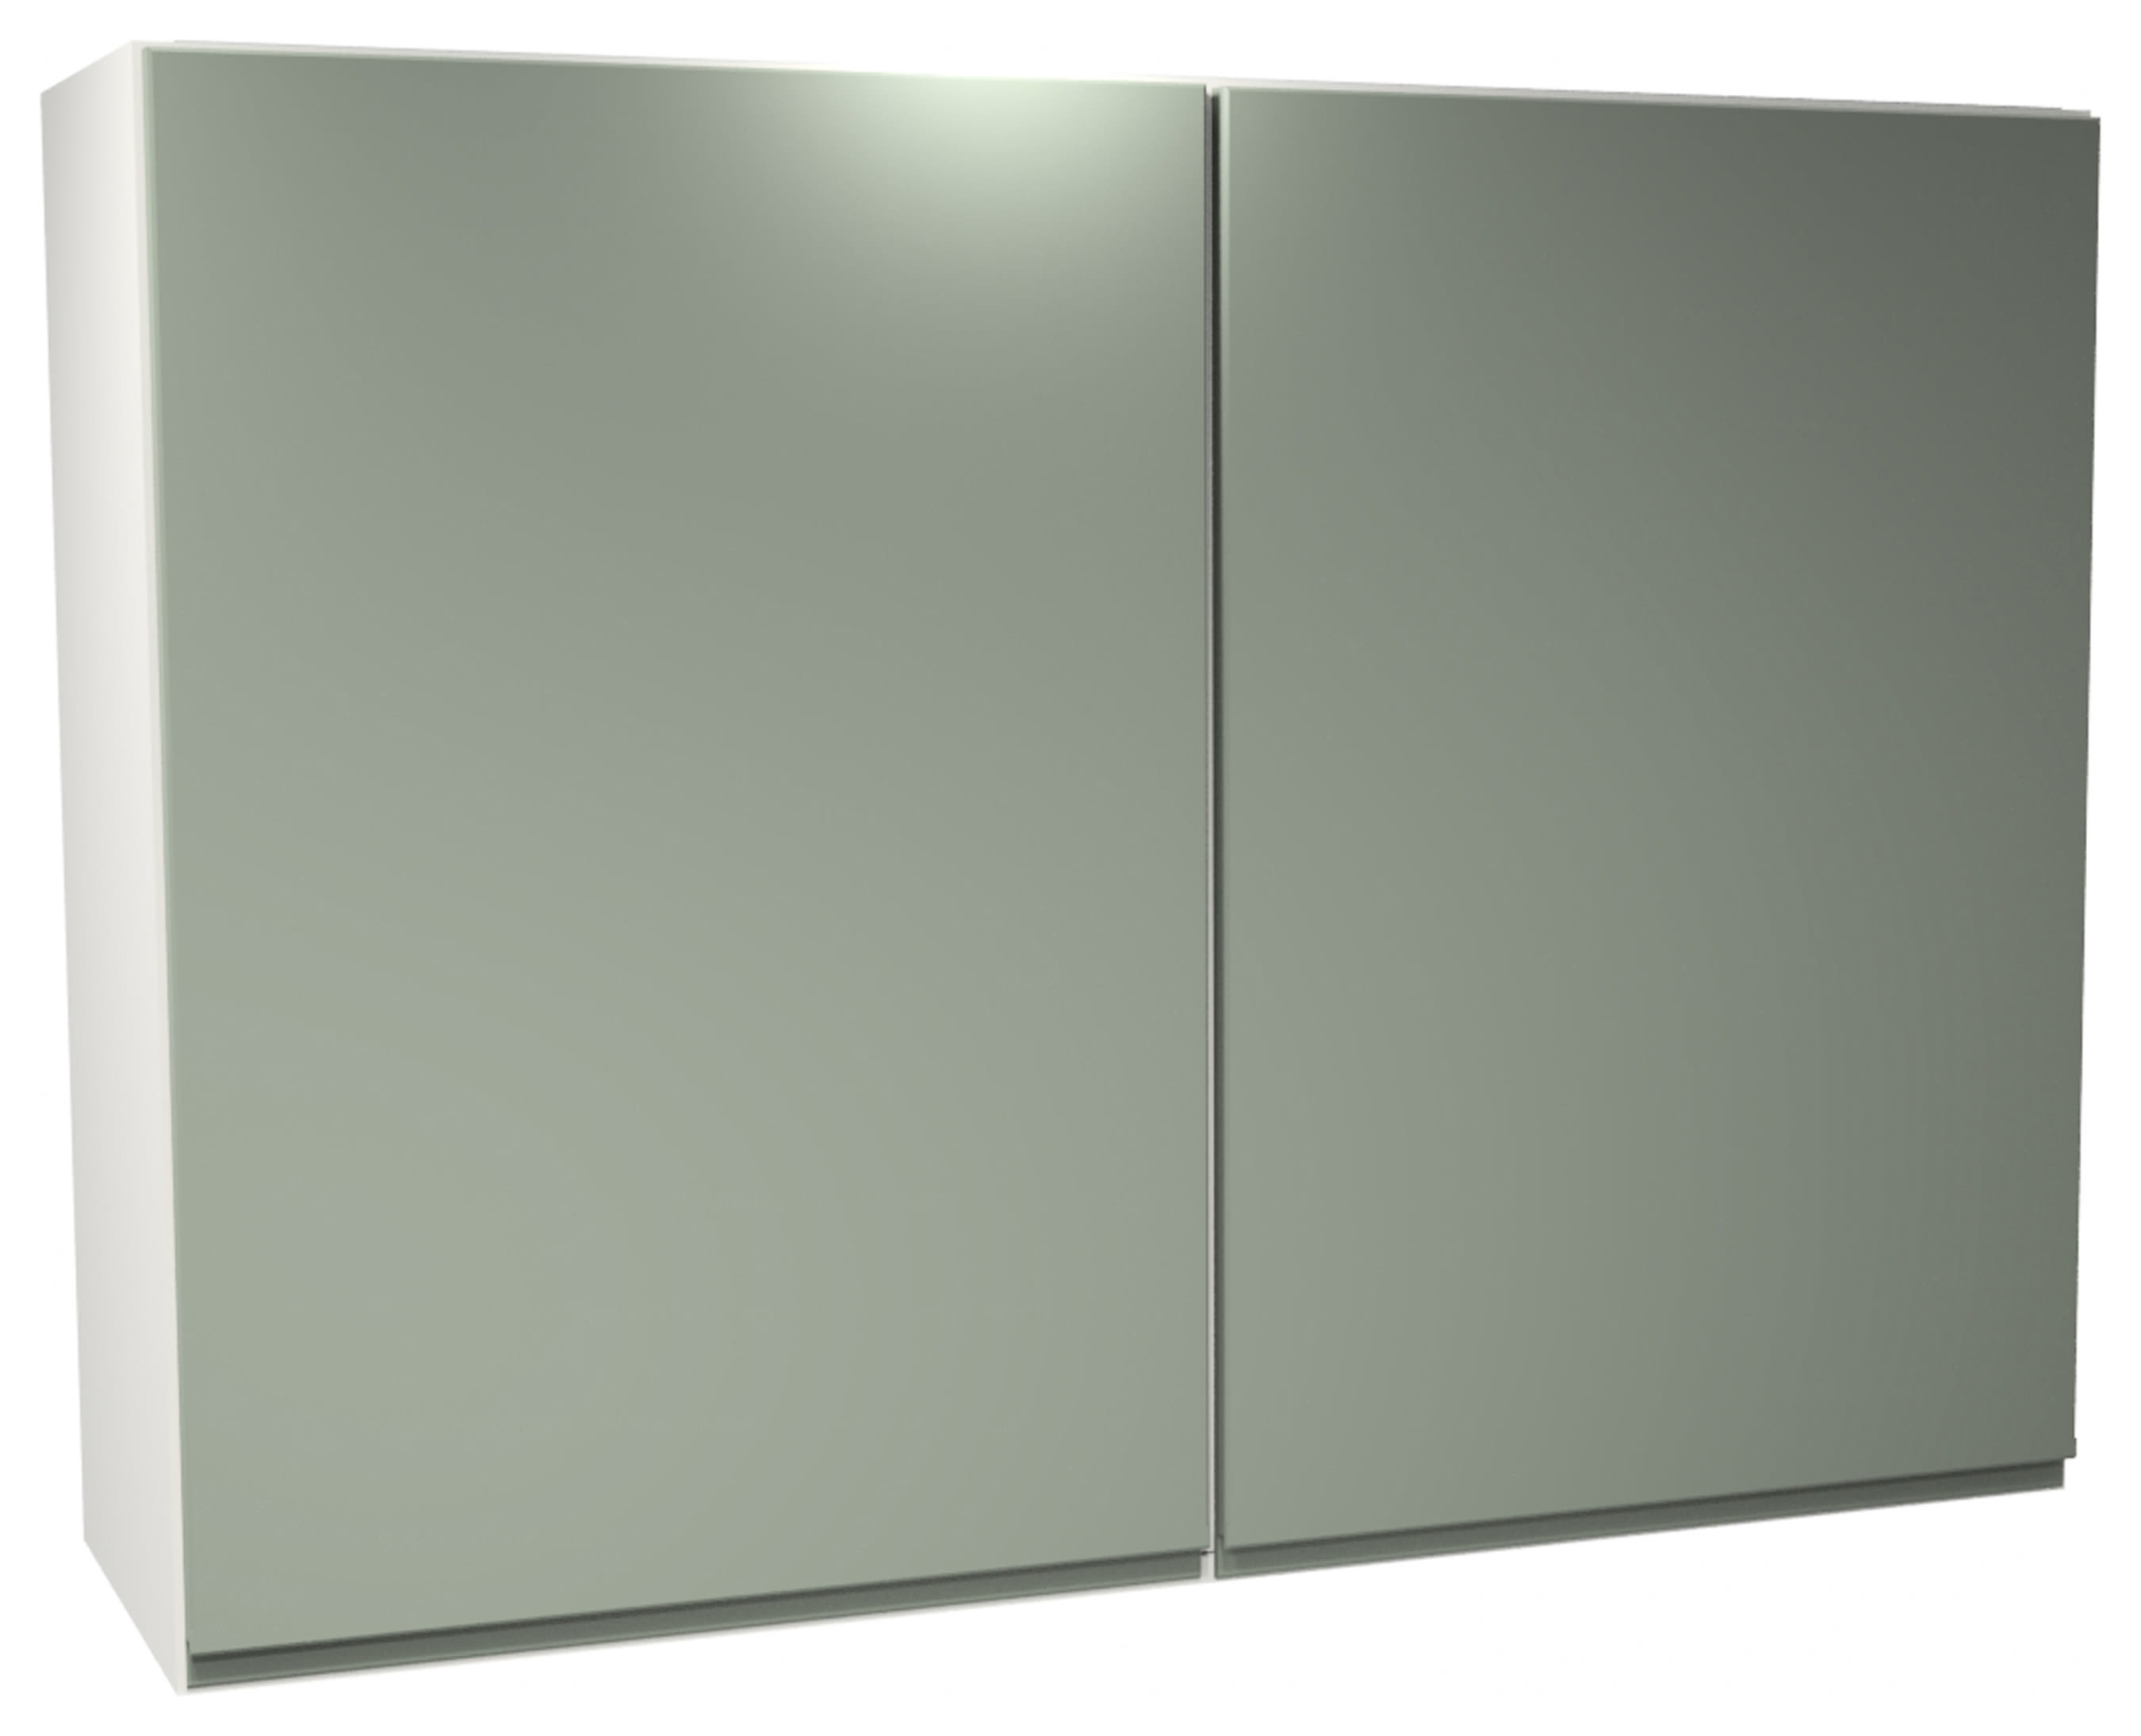 Wickes Madison Reed Green Wall Unit - 1000mm